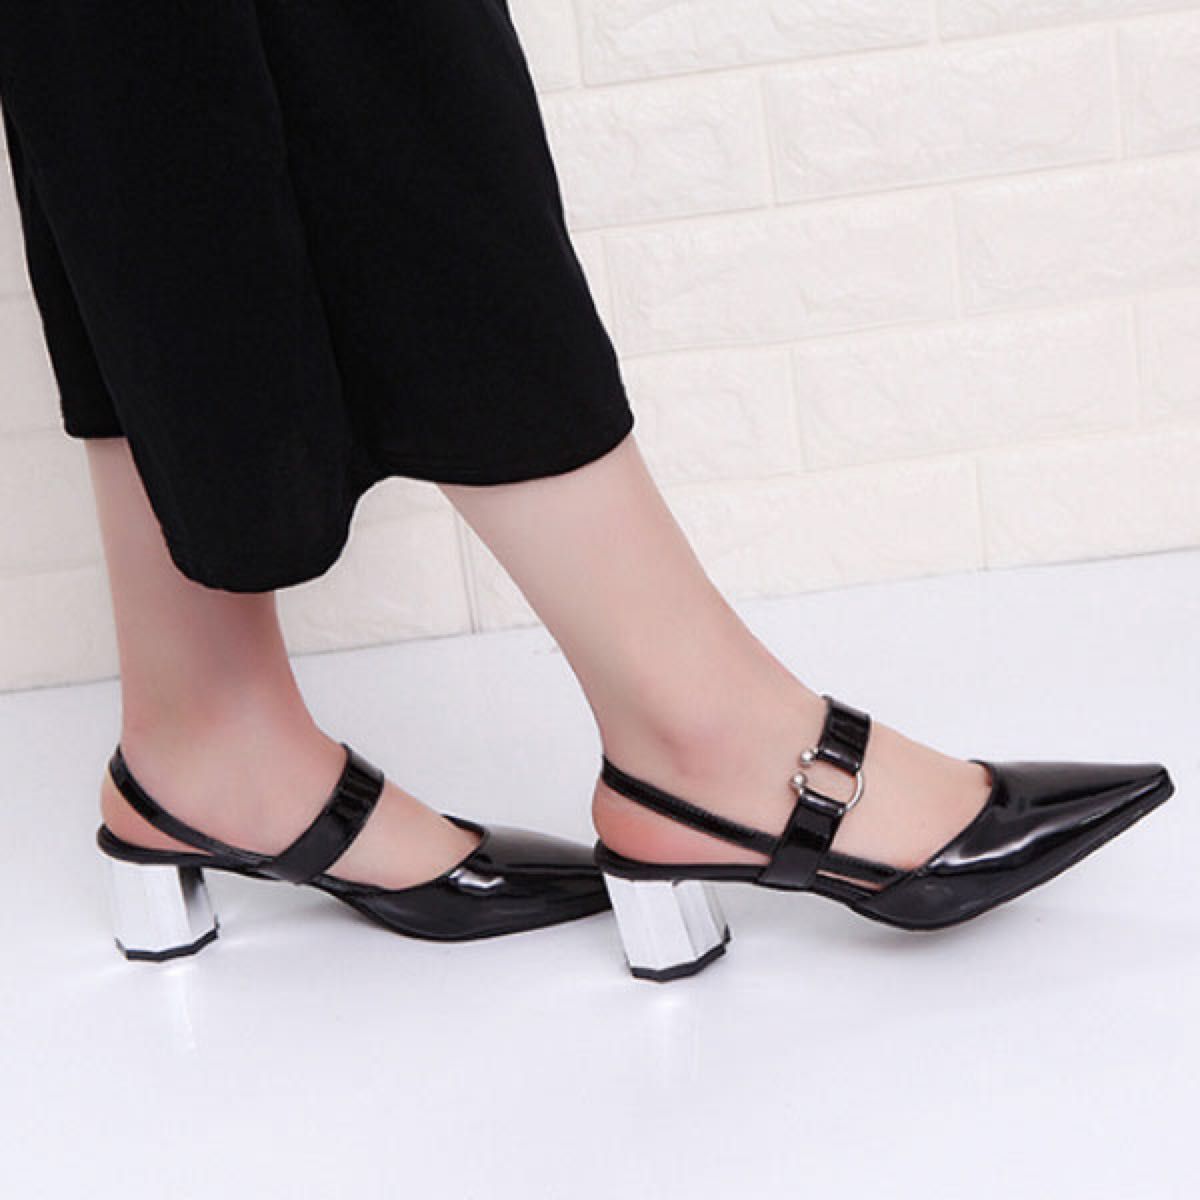 Buy Black Office Style Pump at Lowest Price - BLOFST28031MGJ04204 | Kraftly